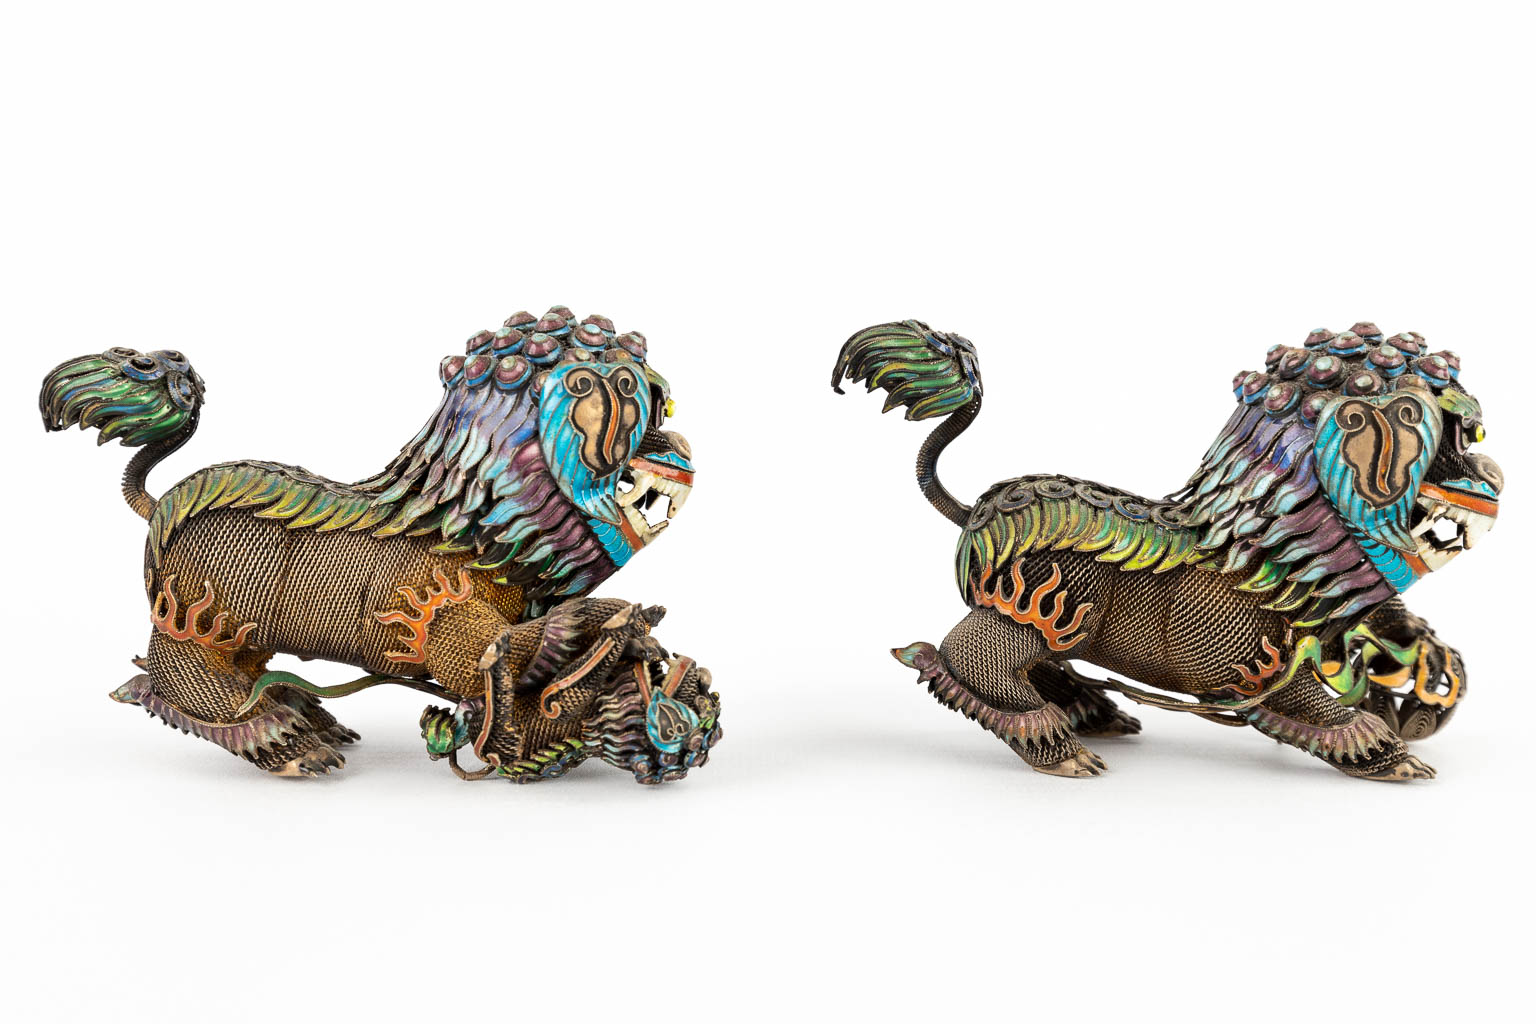 A pair of foo dogs, filigree silver finished with enamel. 20th C. 251g. (D:4 x W:10,5 x H:7 cm)